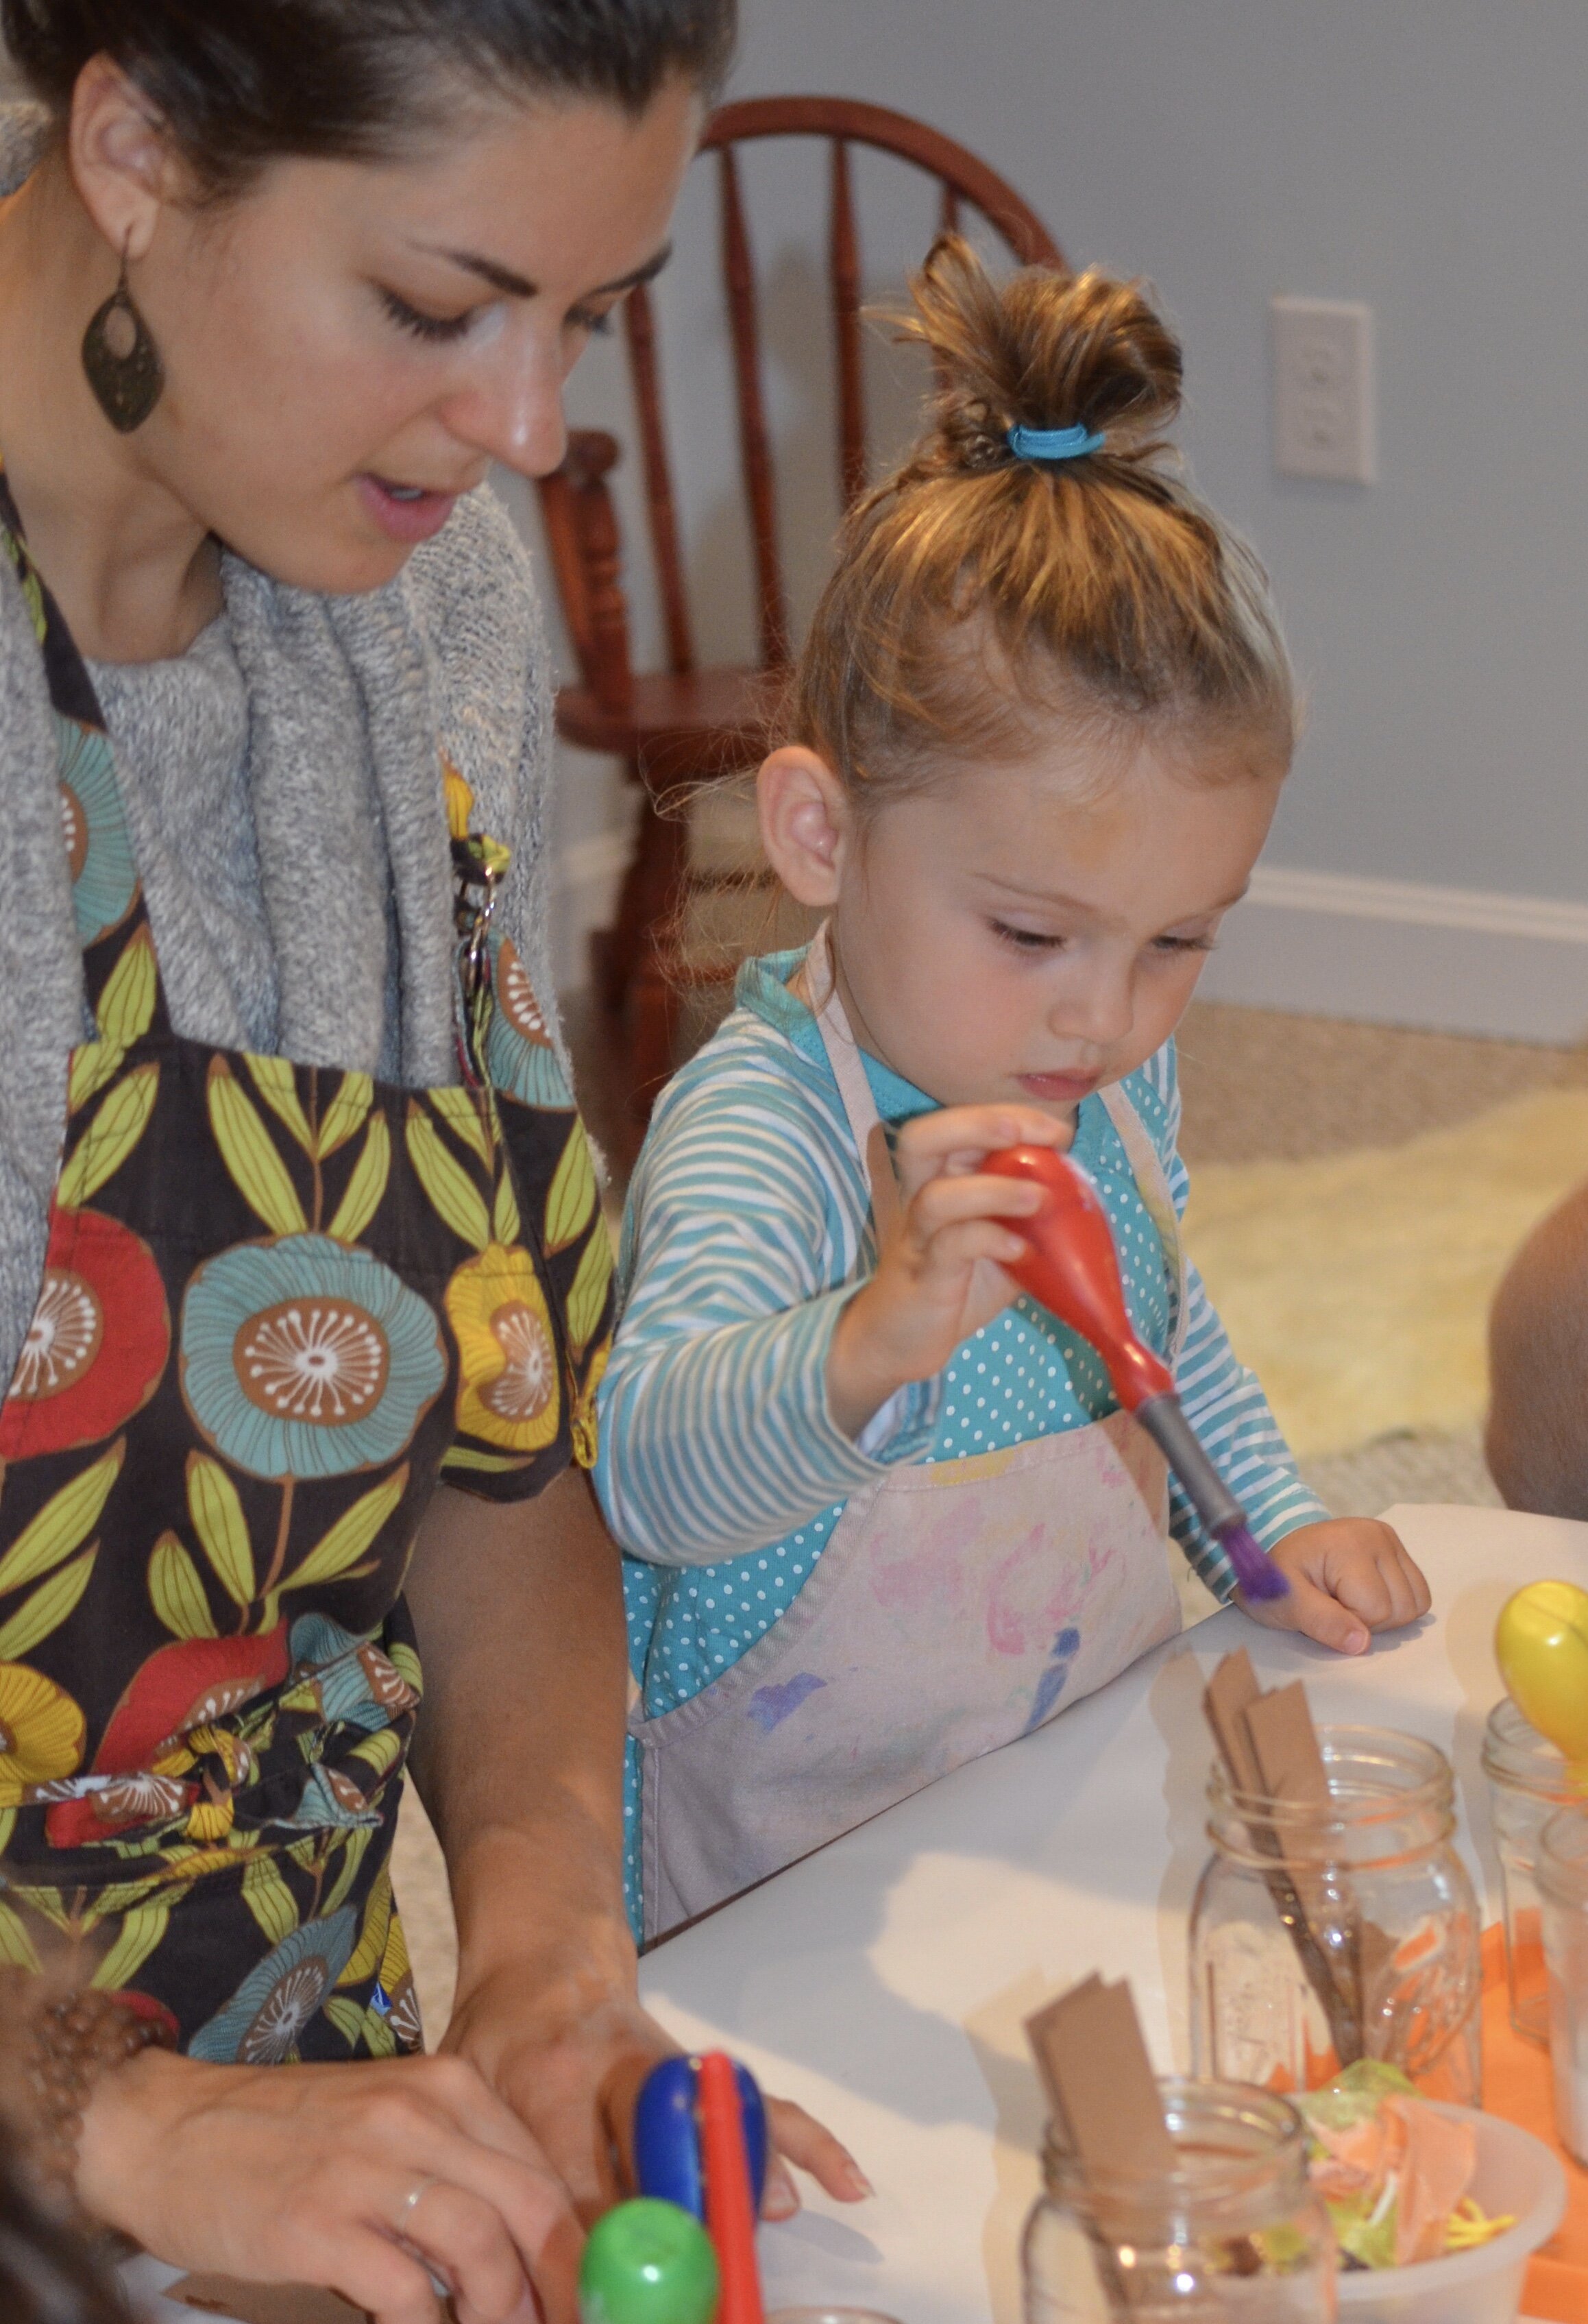 Newburyport Toddler Cooking and Art Class Harmony Natural Learning Center.jpg